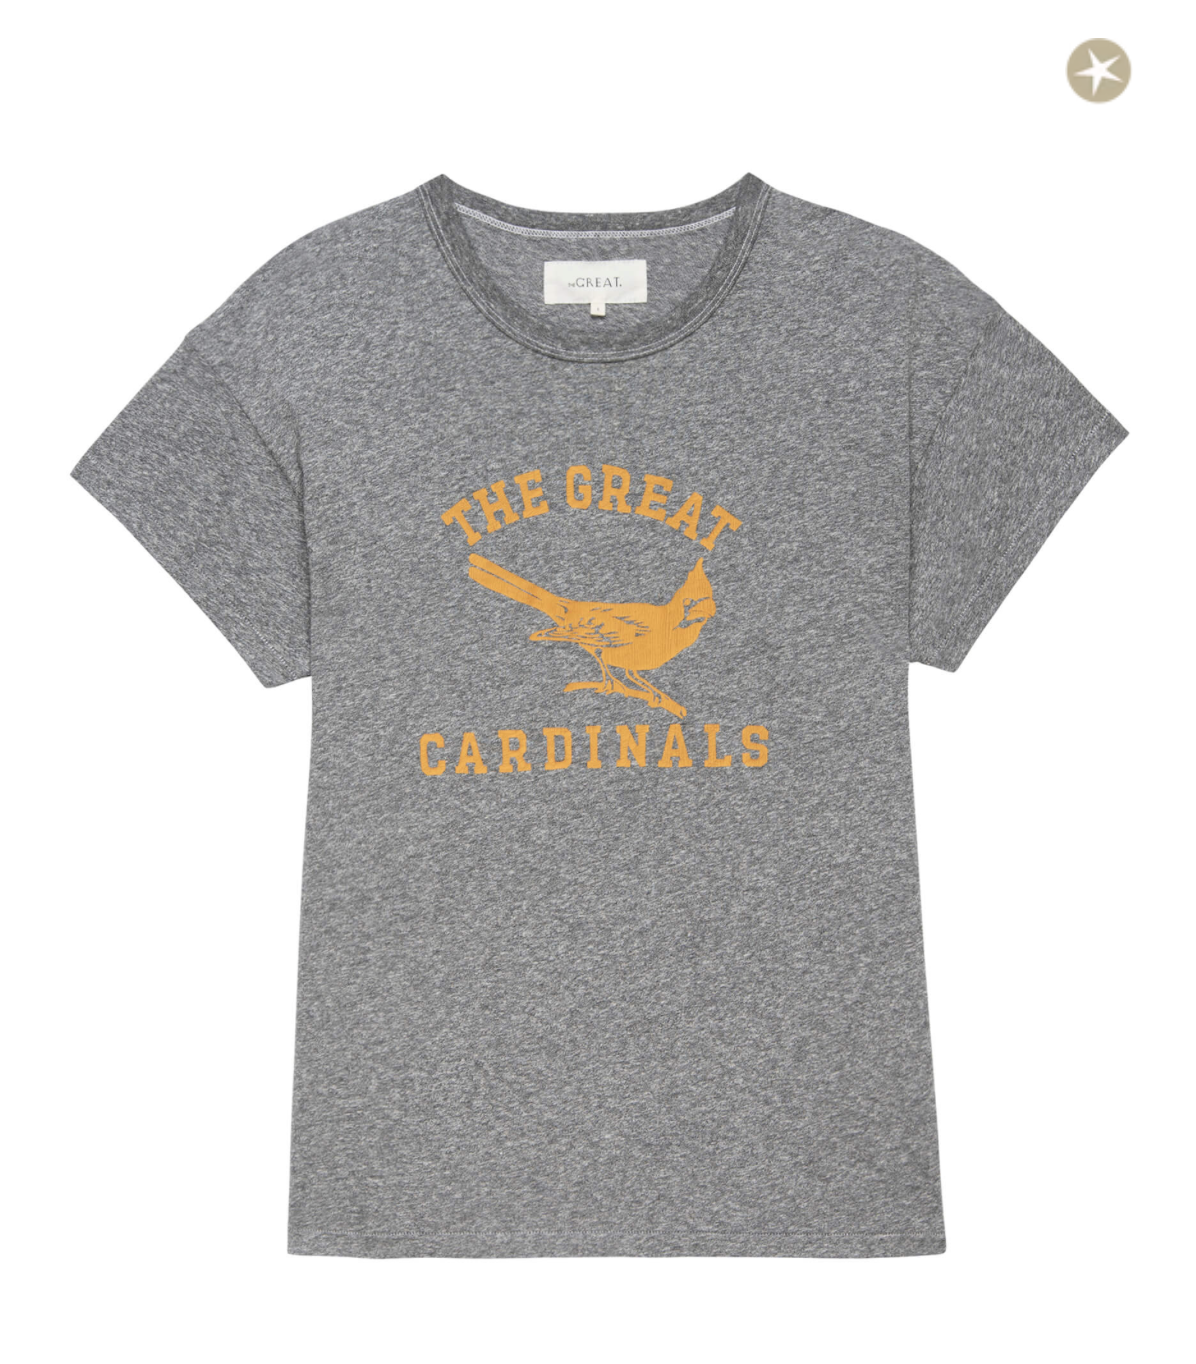 The Boxy Crew. Heather Grey with Perched Cardinal Graphic